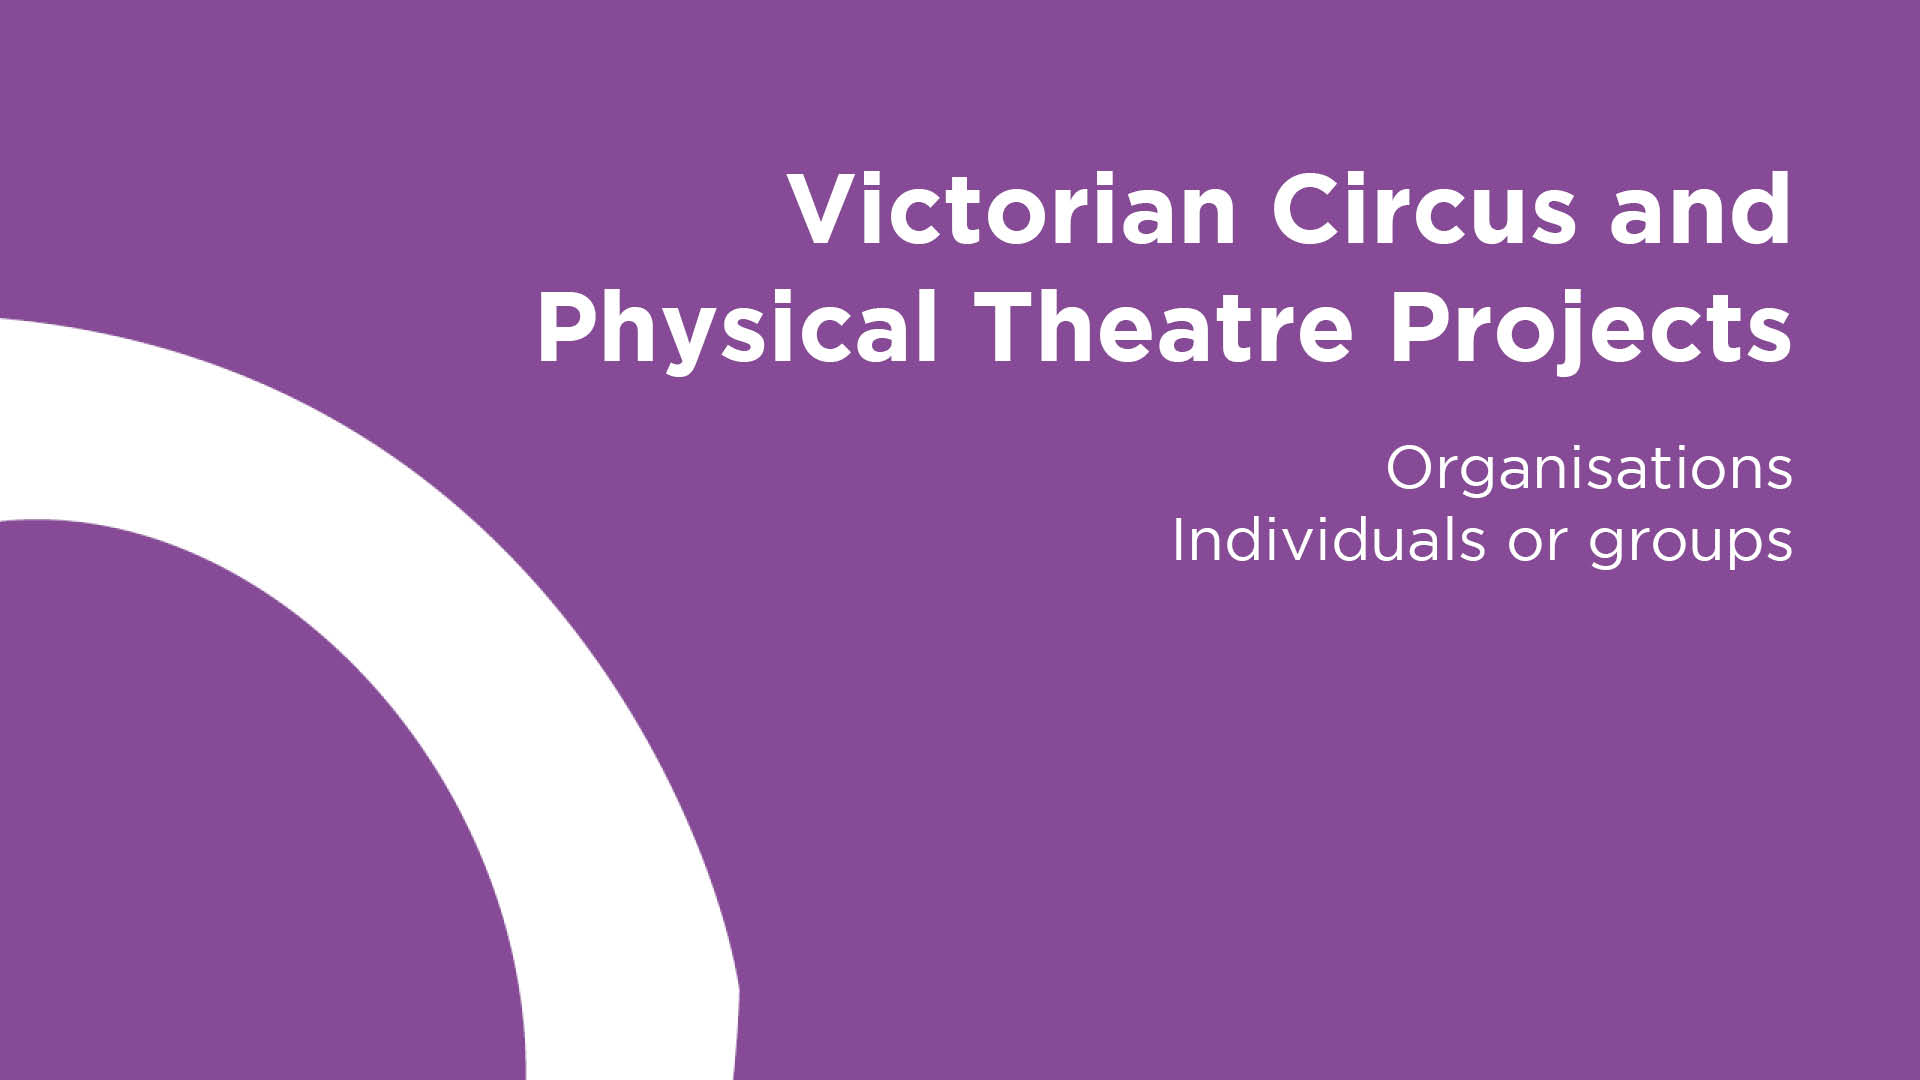 Victorian Circus and Physical Theatre Projects for Individuals and Groups 